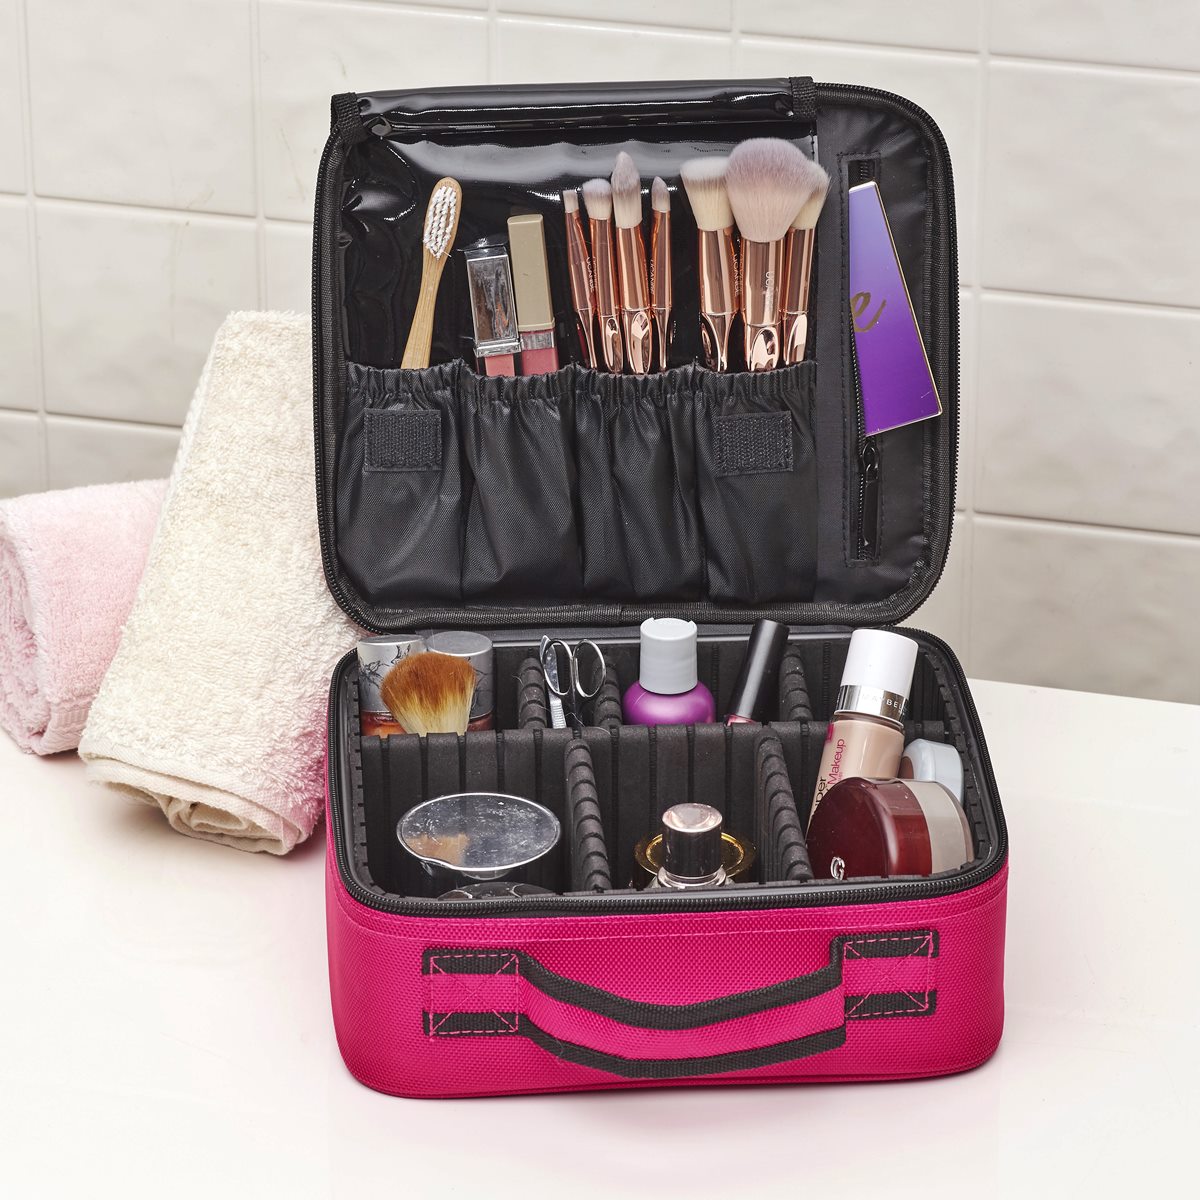 Travel Cosmetic Case Review: The Perfect Organizer for On-the-Go